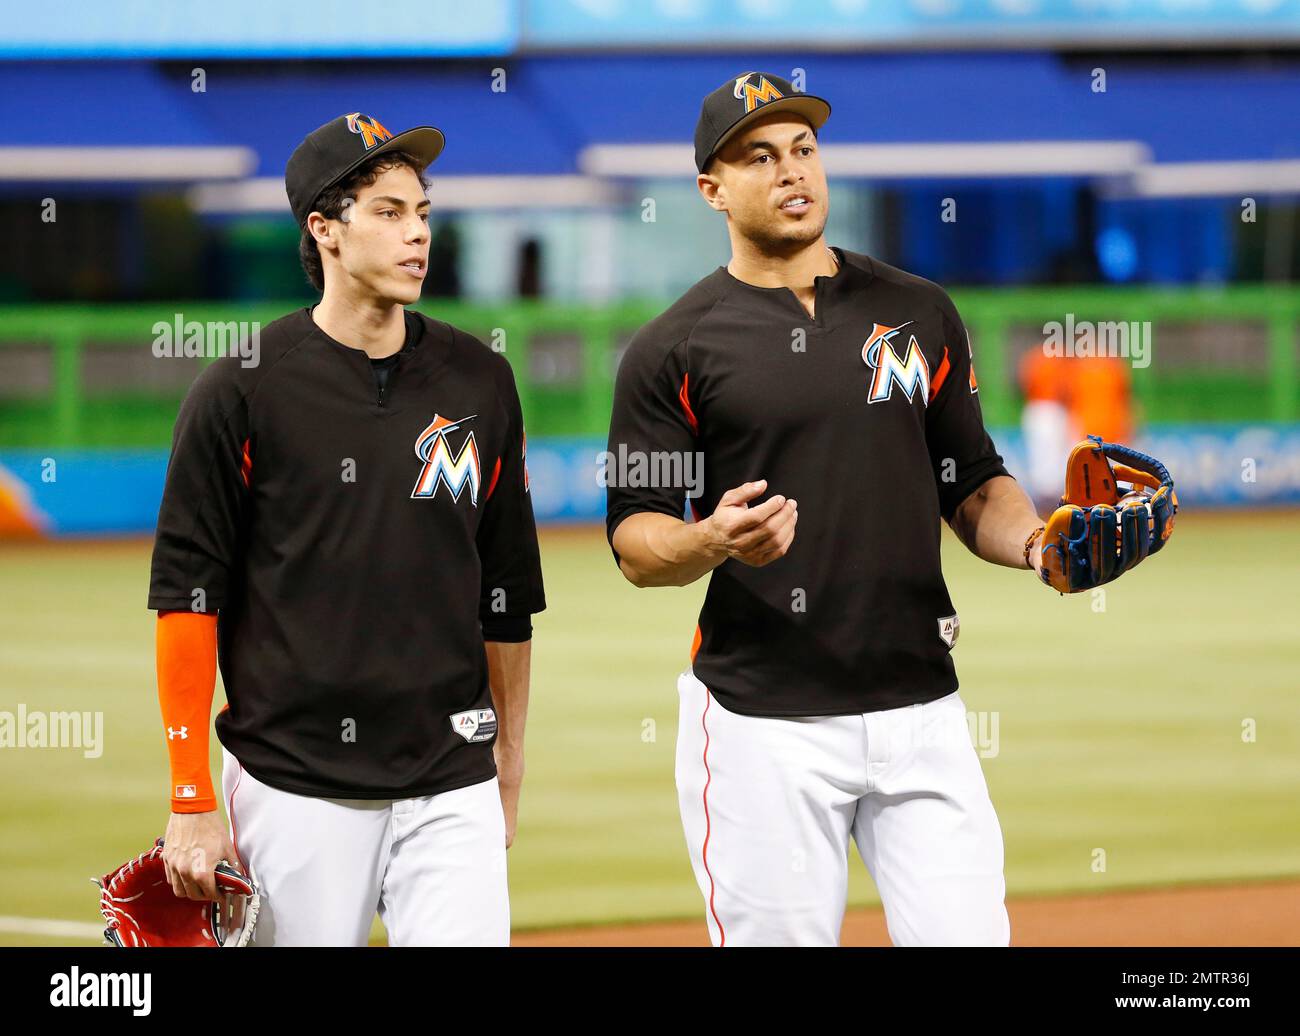 Miami Marlins' Christian Yelich, left, poses for a photograph with Saturday  Night Live comedian Pete Davidson before a baseball game between the  Marlins and the New York Mets, Tuesday, Sept. 15, 2015